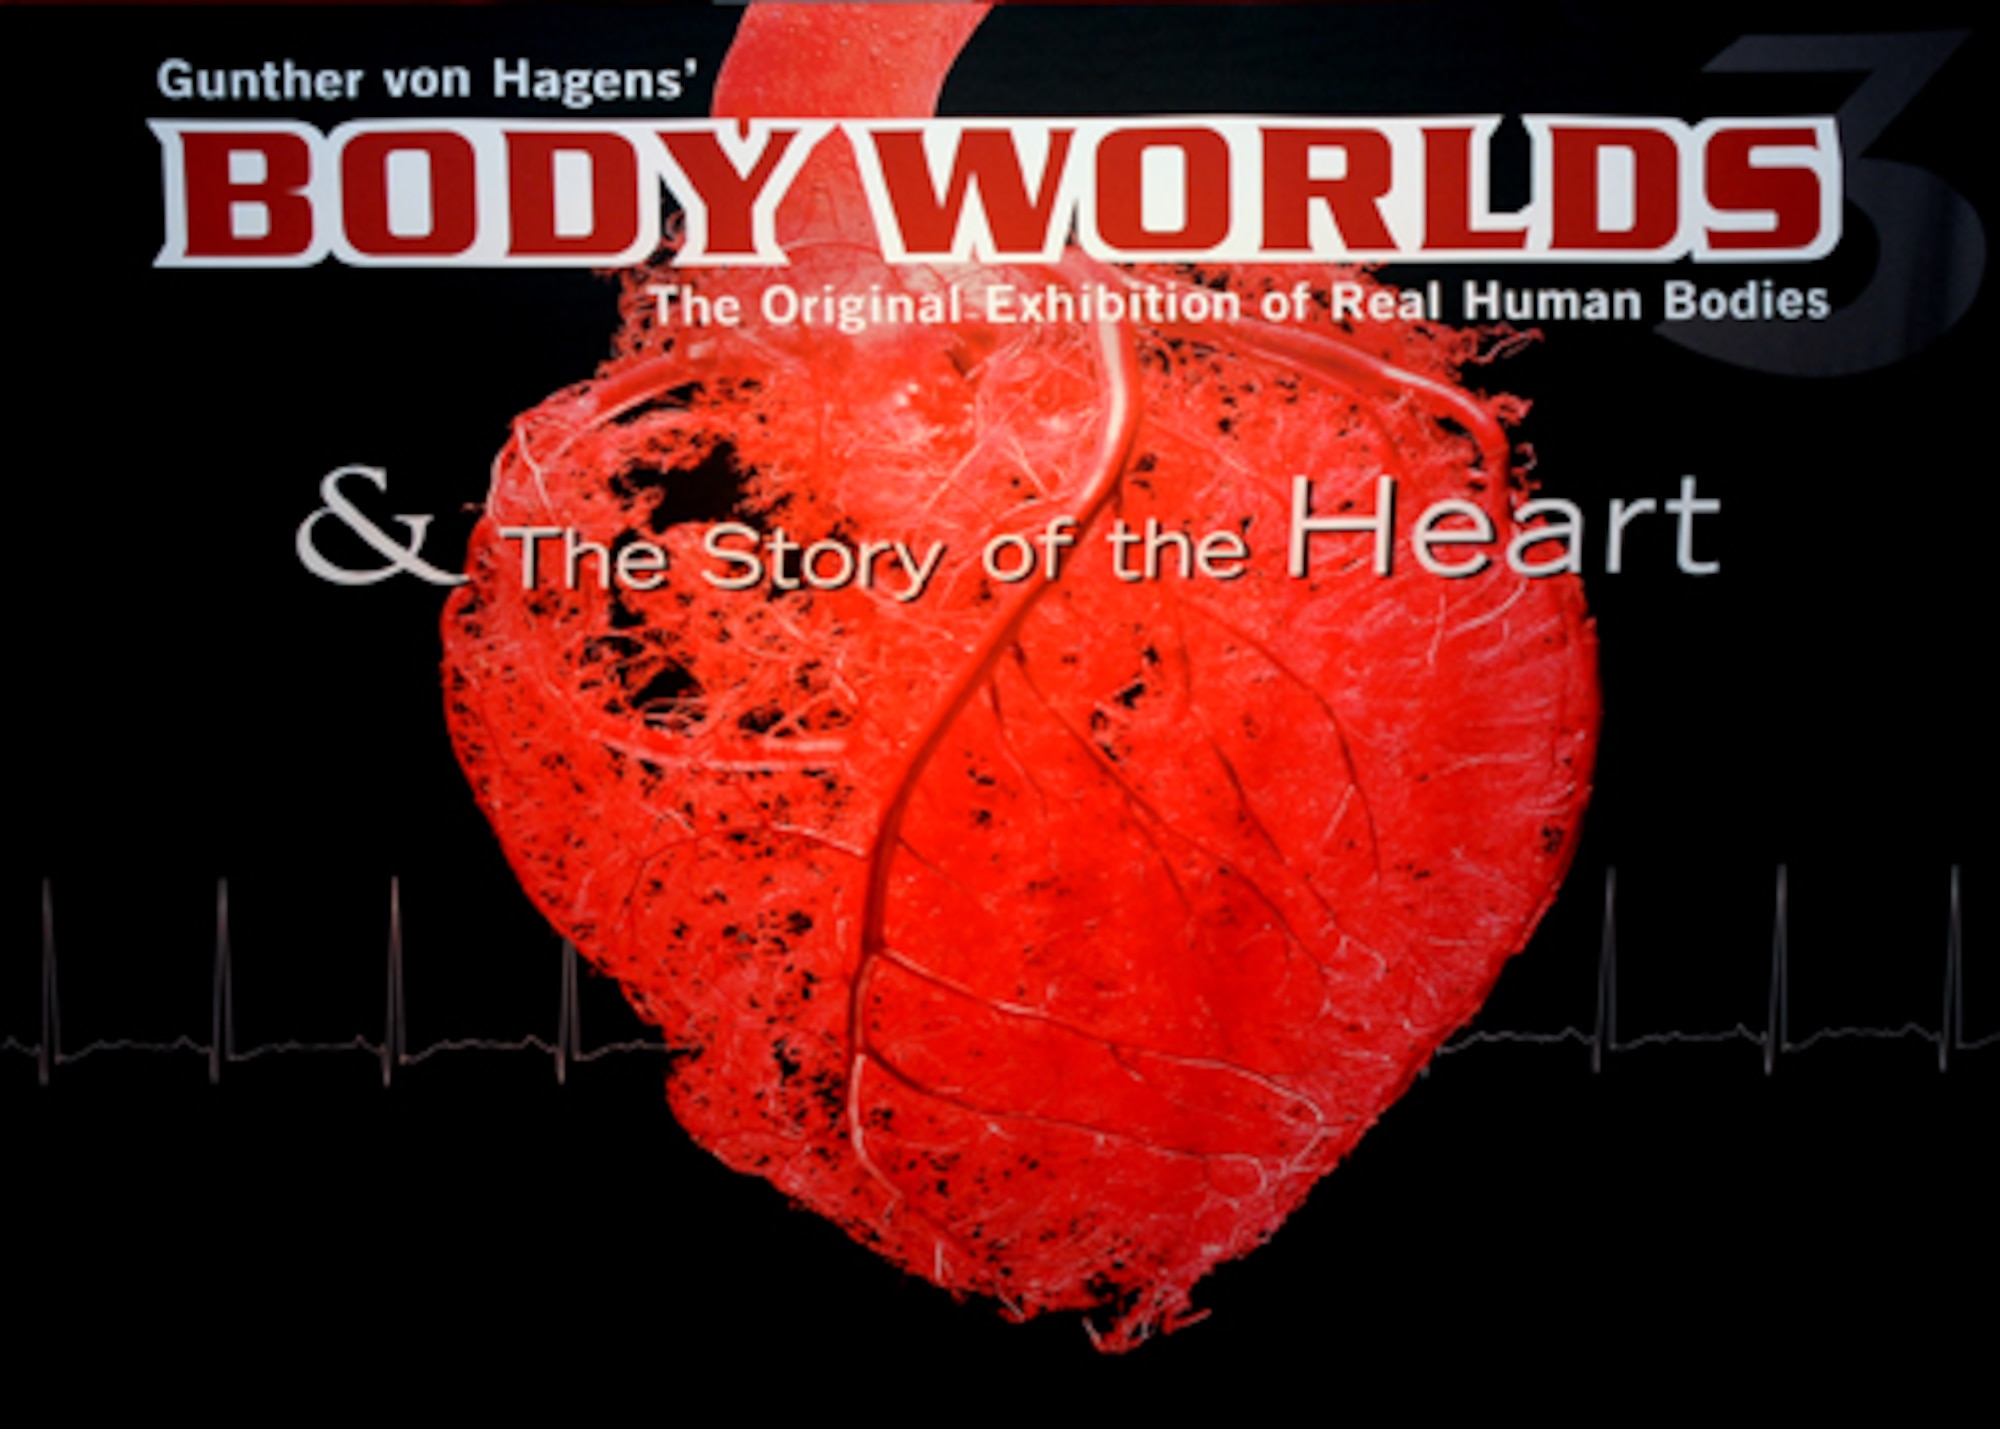 DENVER, Colo. -- Gunther von Hagens presents Body Worlds and the Story of the Heart, an exhibition that displays real human bodies, at the Denver Museum of Nature and Science. (U.S. Air Force photo by Airman 1st Class Marcy Glass)